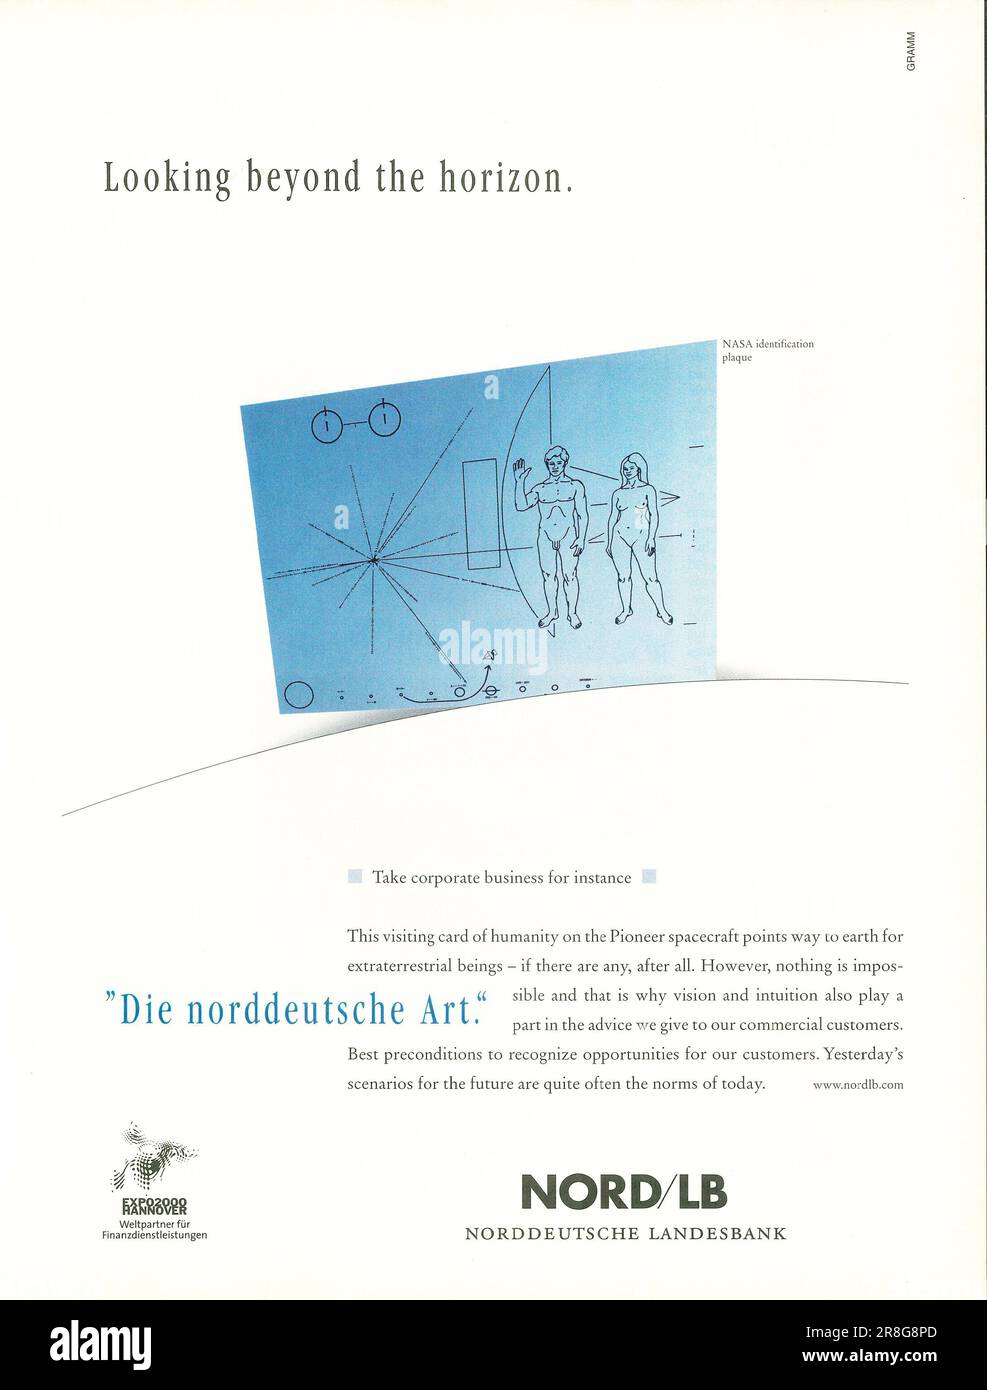 Nord lb, Norddeutsche Landesbank Commercial banking company advert in a magazine 1999 Stock Photo